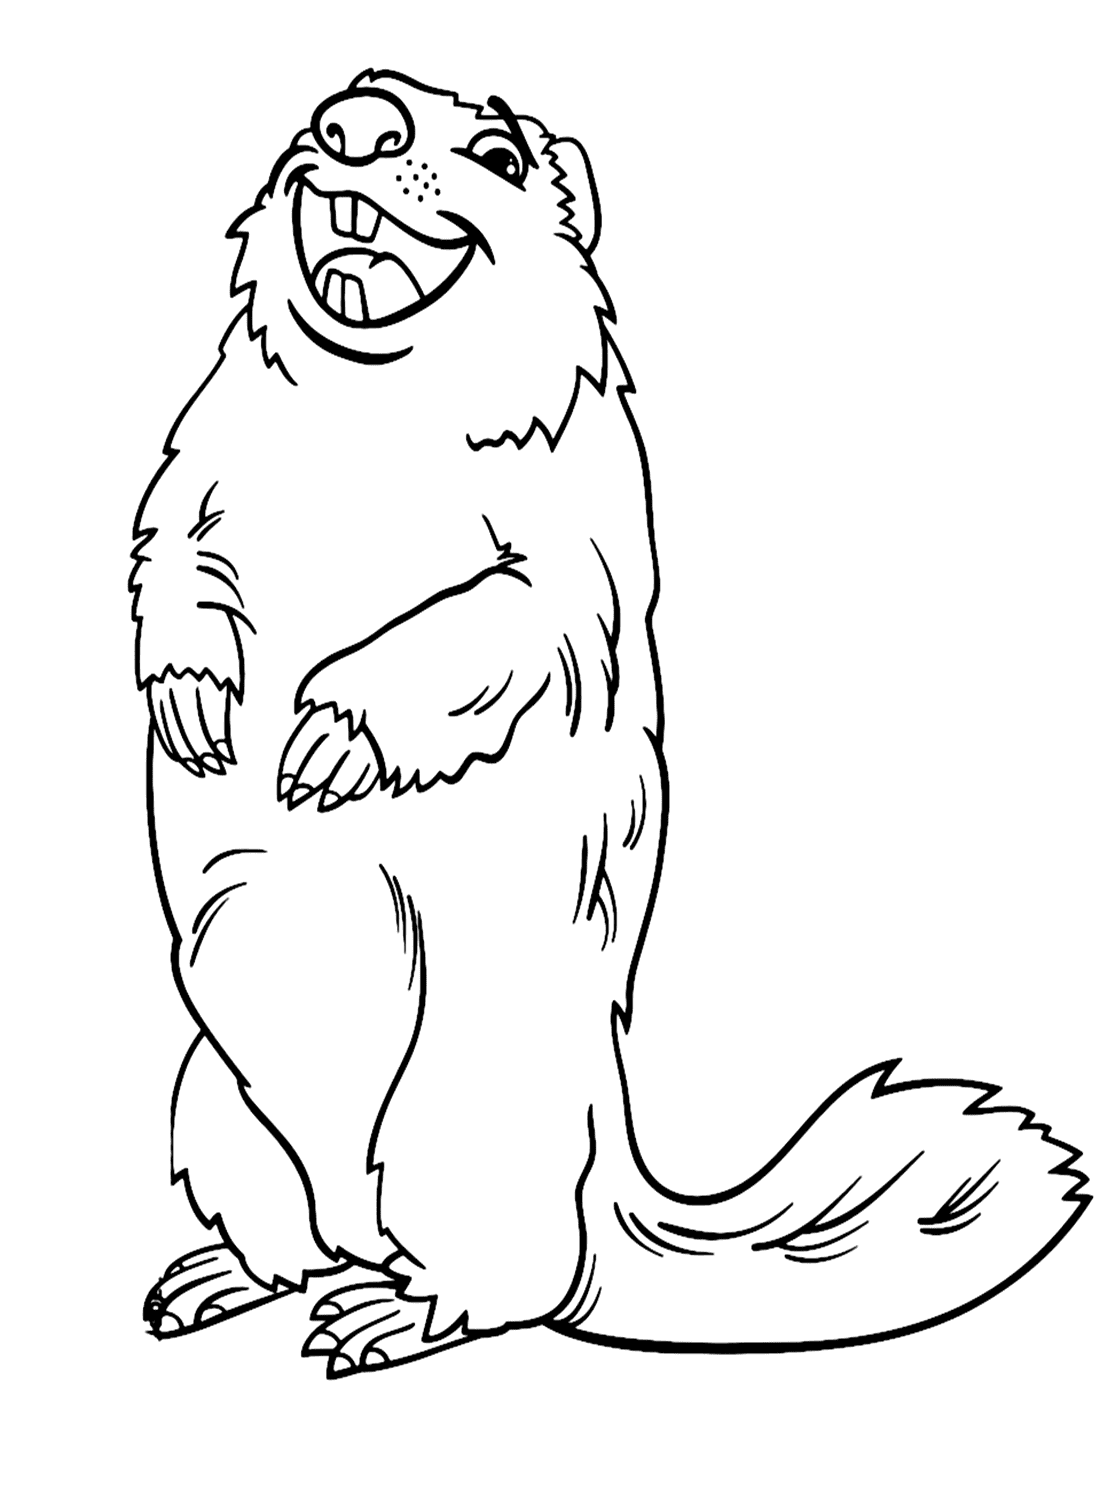 Marmot Coloring Pages - Free Printable Coloring Pages